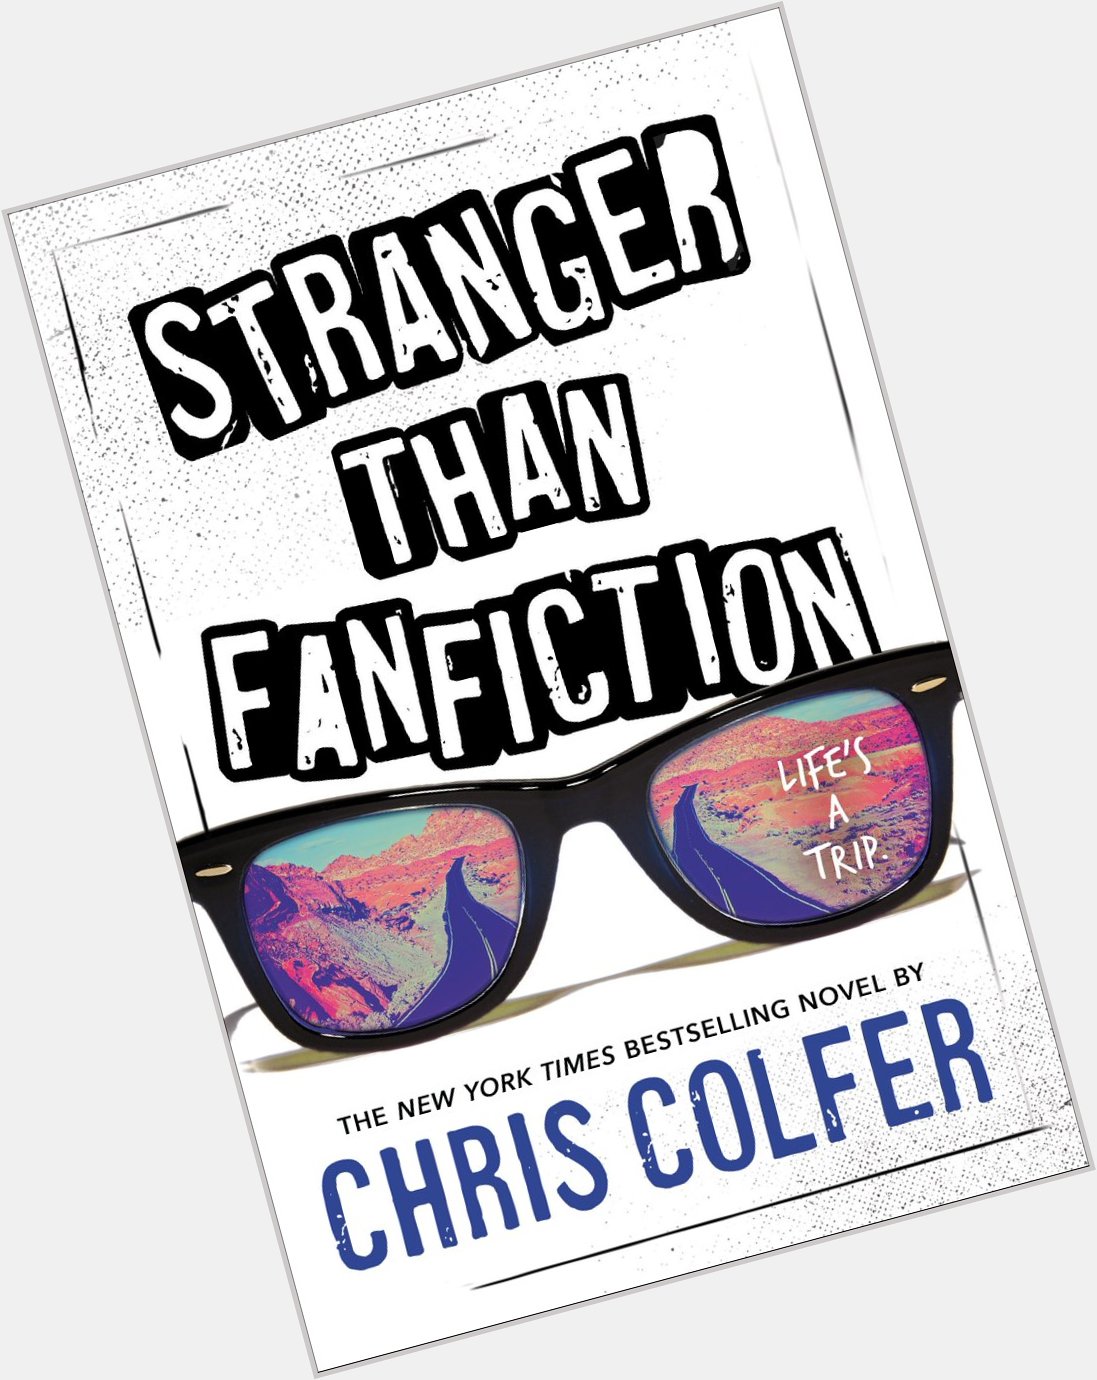 Happy Book Birthday to STRANGER THAN FANFICTION, now out in paperback!  